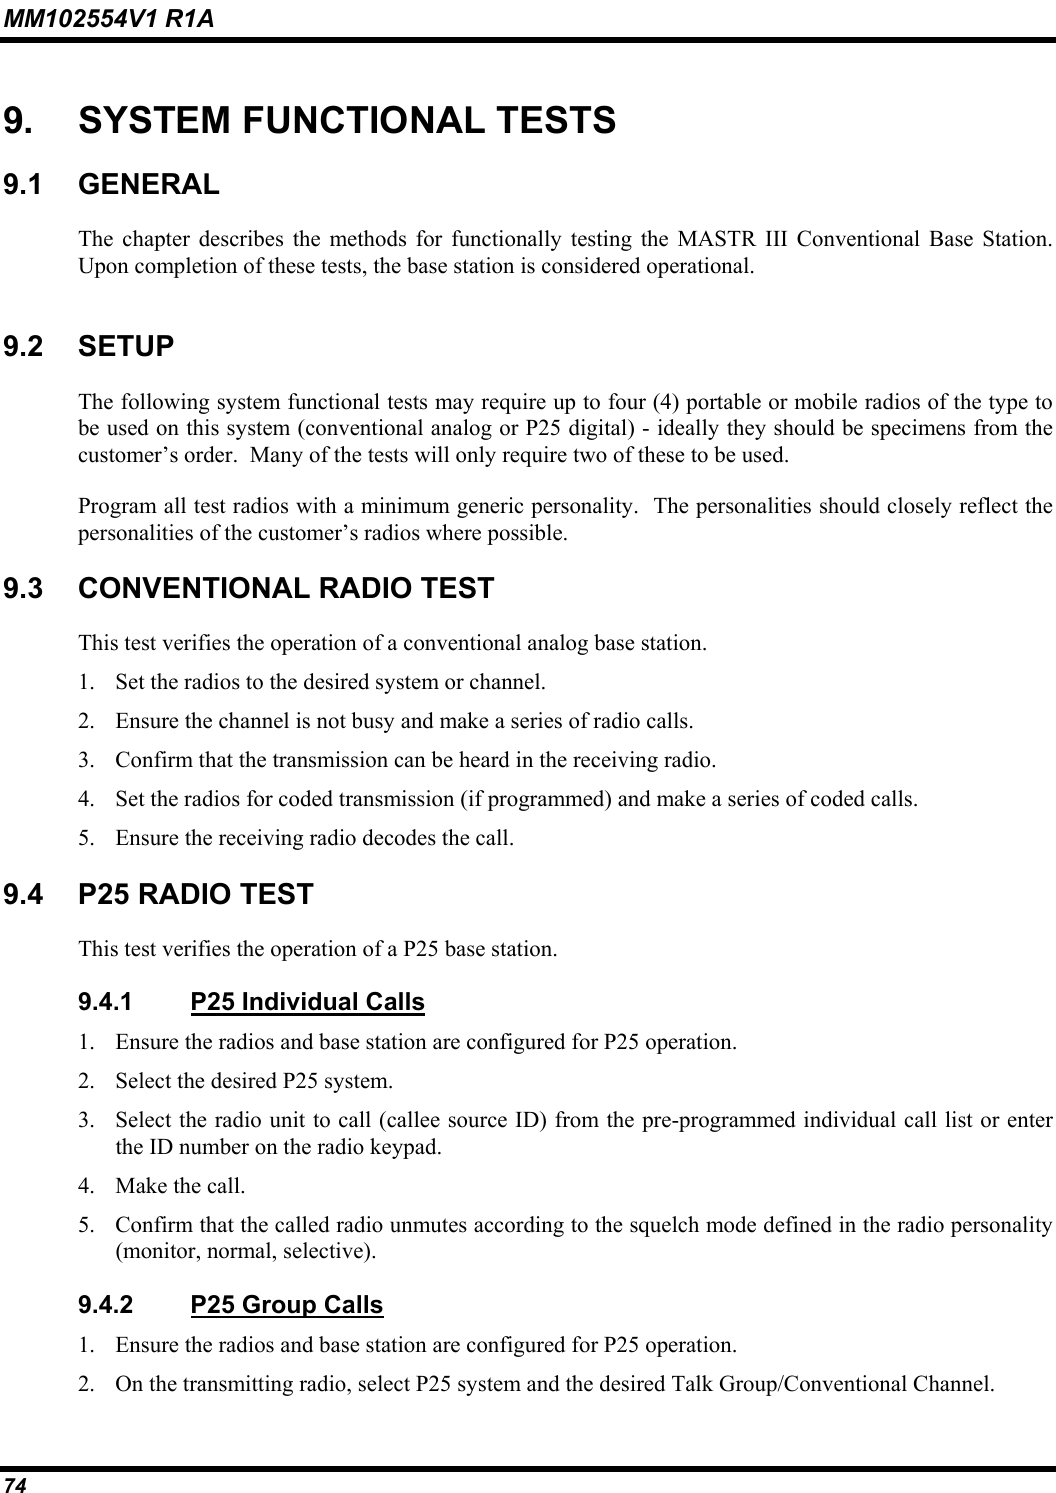 MM102554V1 R1A 74   9.  SYSTEM FUNCTIONAL TESTS 9.1 GENERAL The chapter describes the methods for functionally testing the MASTR III Conventional Base Station.  Upon completion of these tests, the base station is considered operational. 9.2 SETUP The following system functional tests may require up to four (4) portable or mobile radios of the type to be used on this system (conventional analog or P25 digital) - ideally they should be specimens from the customer’s order.  Many of the tests will only require two of these to be used.   Program all test radios with a minimum generic personality.  The personalities should closely reflect the personalities of the customer’s radios where possible.   9.3  CONVENTIONAL RADIO TEST This test verifies the operation of a conventional analog base station. 1.  Set the radios to the desired system or channel. 2.  Ensure the channel is not busy and make a series of radio calls.  3.  Confirm that the transmission can be heard in the receiving radio. 4.  Set the radios for coded transmission (if programmed) and make a series of coded calls. 5.  Ensure the receiving radio decodes the call. 9.4  P25 RADIO TEST This test verifies the operation of a P25 base station. 9.4.1  P25 Individual Calls 1.  Ensure the radios and base station are configured for P25 operation. 2.  Select the desired P25 system.  3.  Select the radio unit to call (callee source ID) from the pre-programmed individual call list or enter the ID number on the radio keypad. 4.  Make the call. 5.  Confirm that the called radio unmutes according to the squelch mode defined in the radio personality (monitor, normal, selective). 9.4.2  P25 Group Calls 1.  Ensure the radios and base station are configured for P25 operation. 2.  On the transmitting radio, select P25 system and the desired Talk Group/Conventional Channel.  